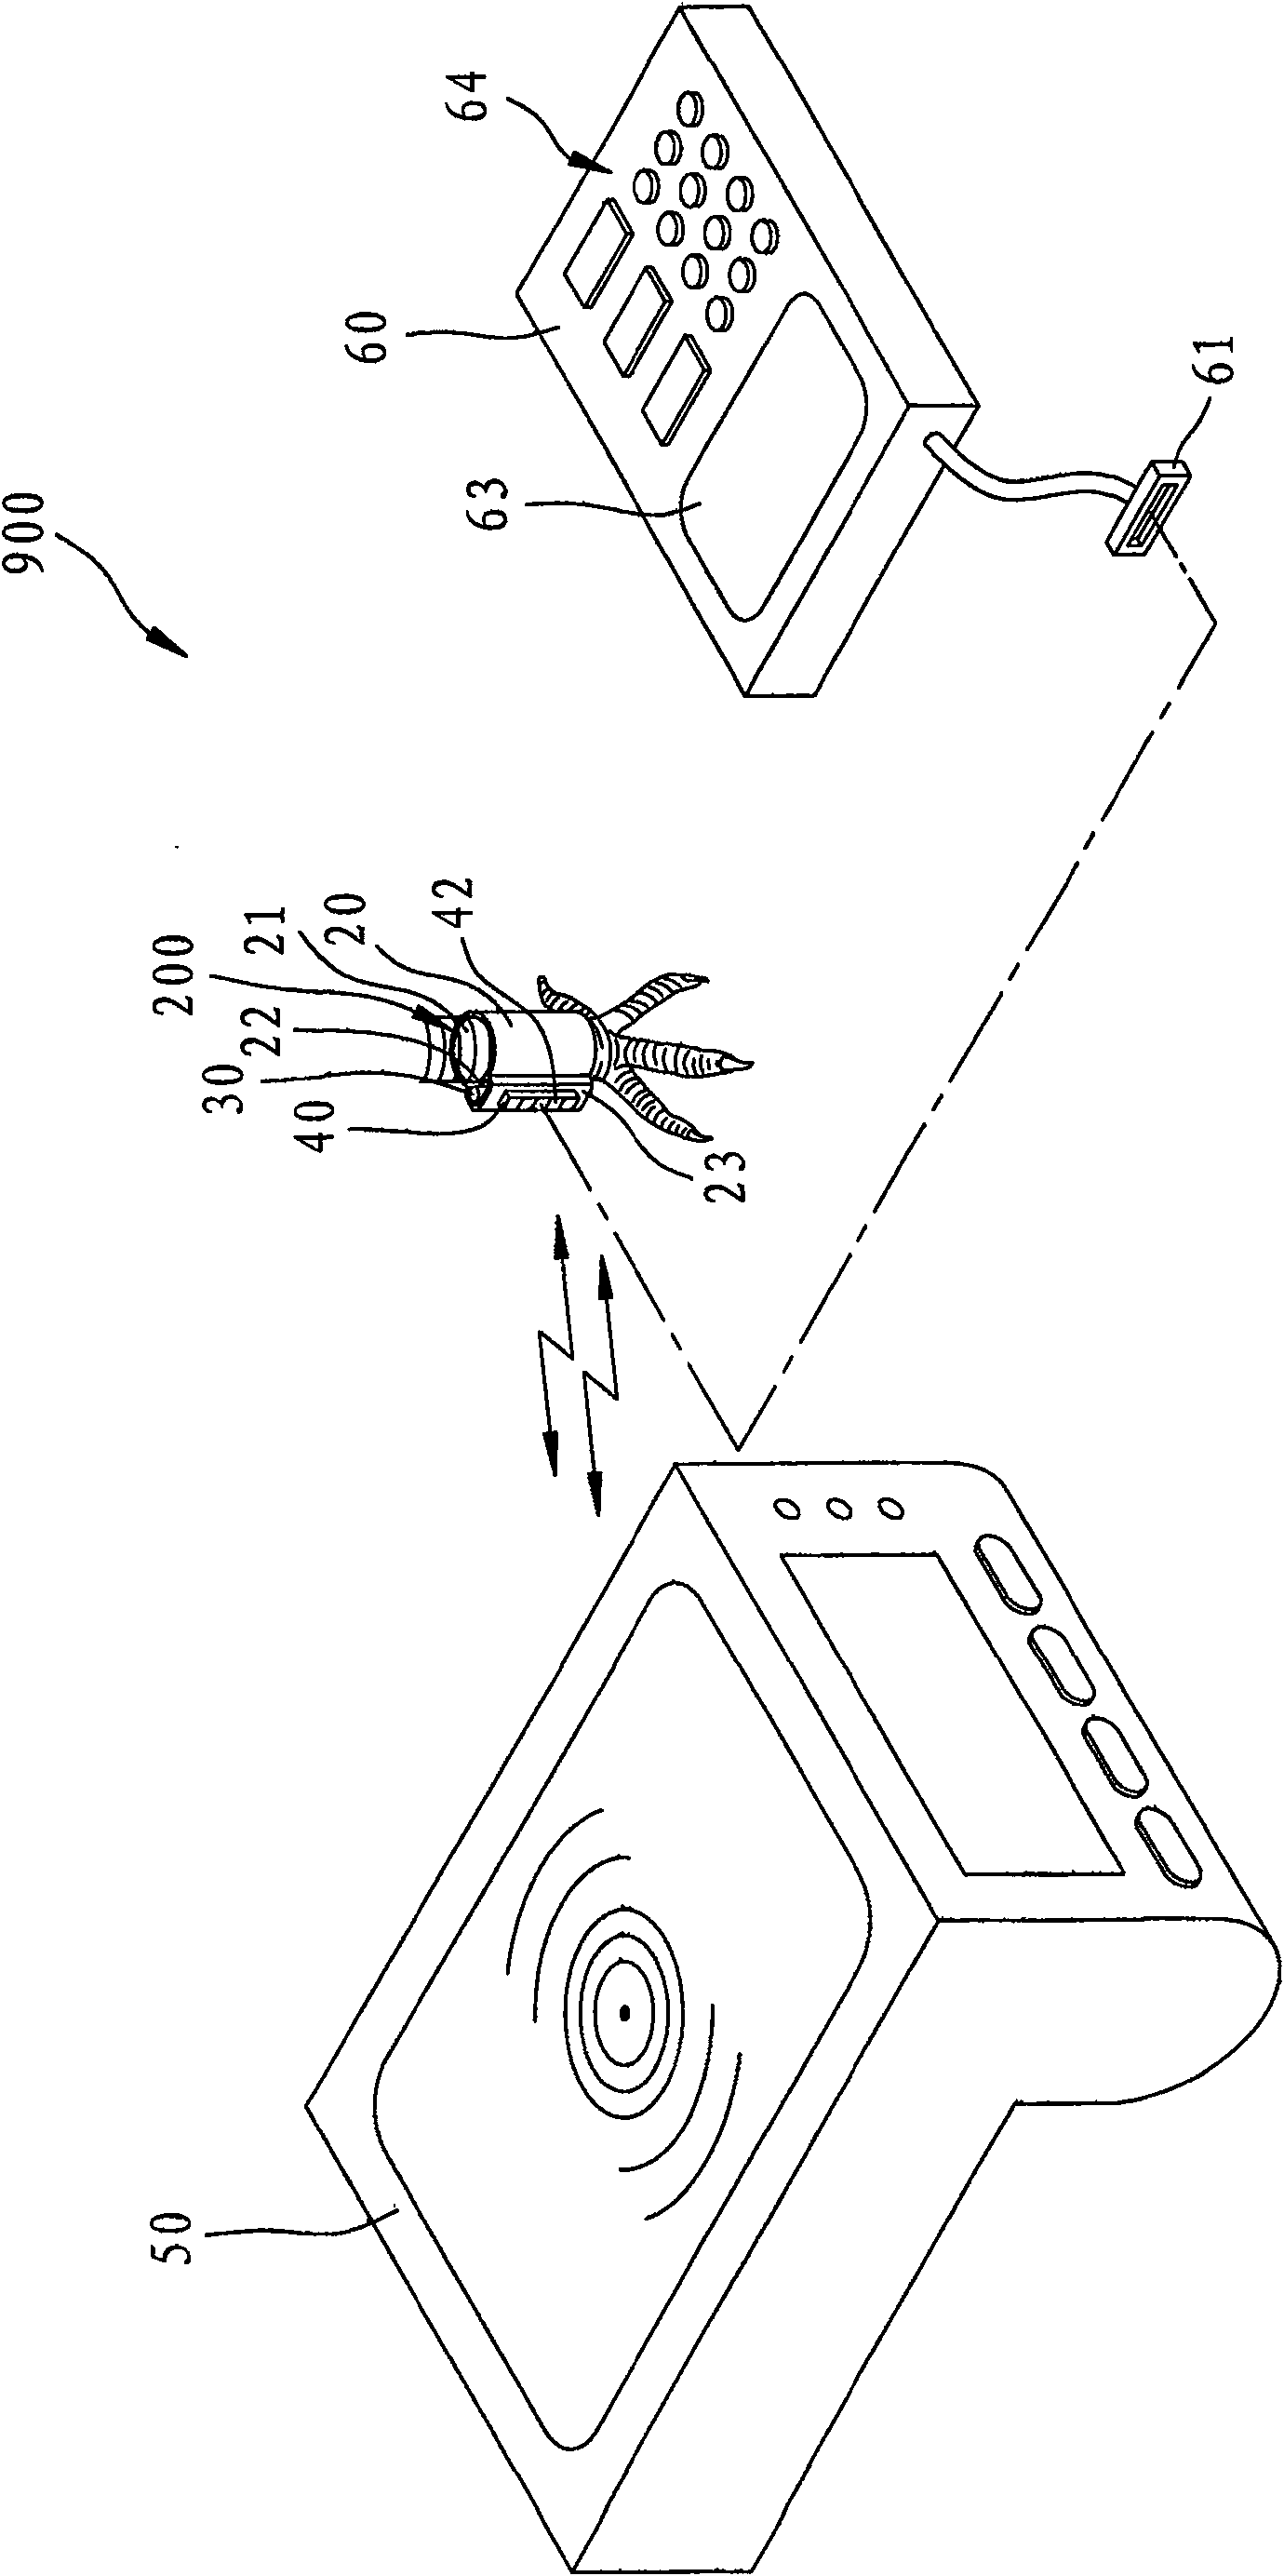 Double-mode interpretation pigeon loop and double-mode identification system of race pigeon